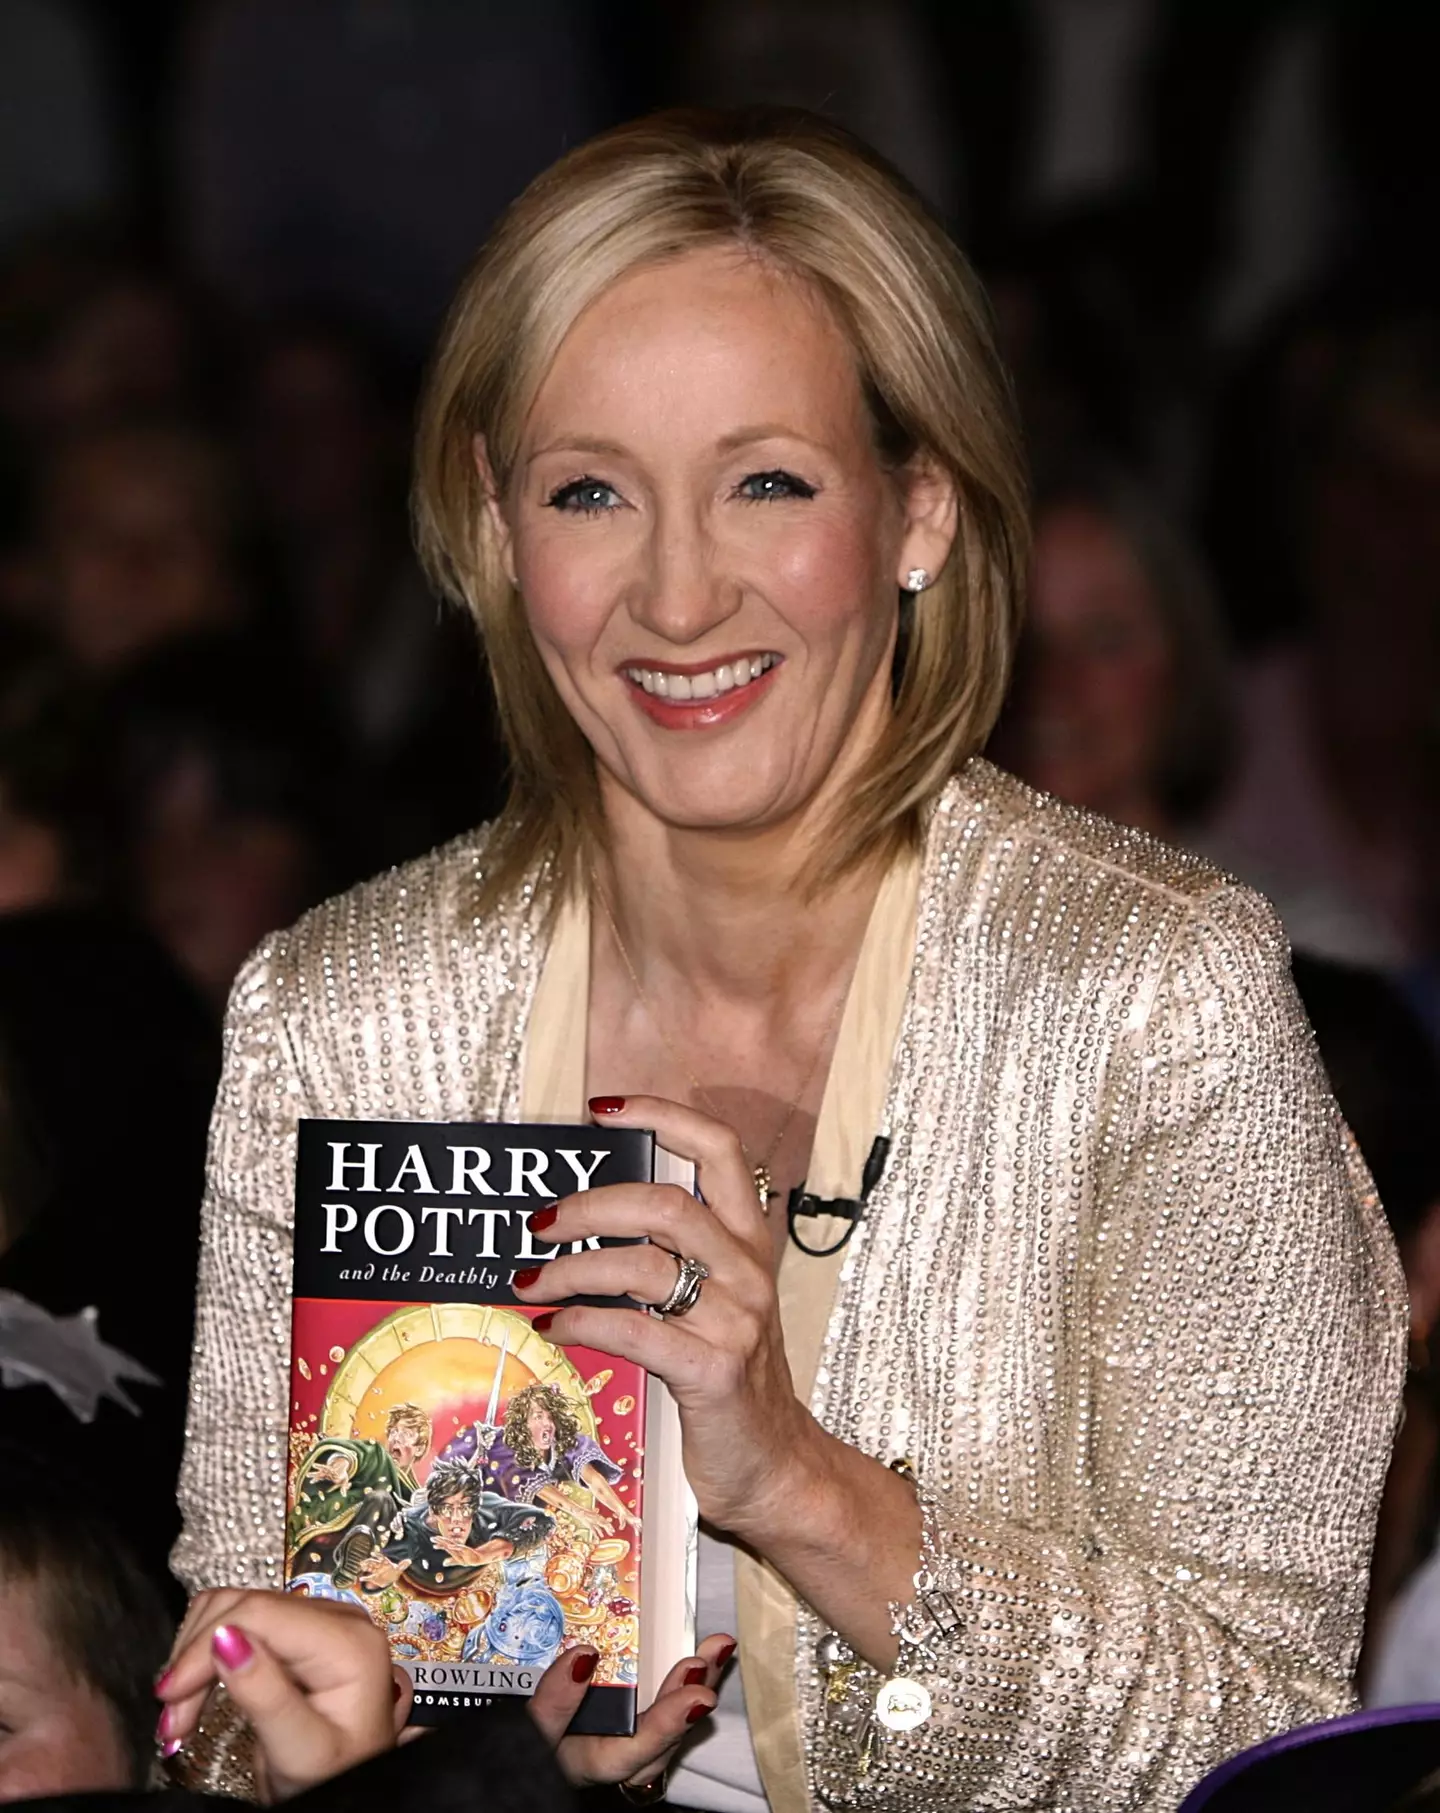 Some fans have called for a boycott of the game following JK Rowling’s trans-phobic comments in 2020.